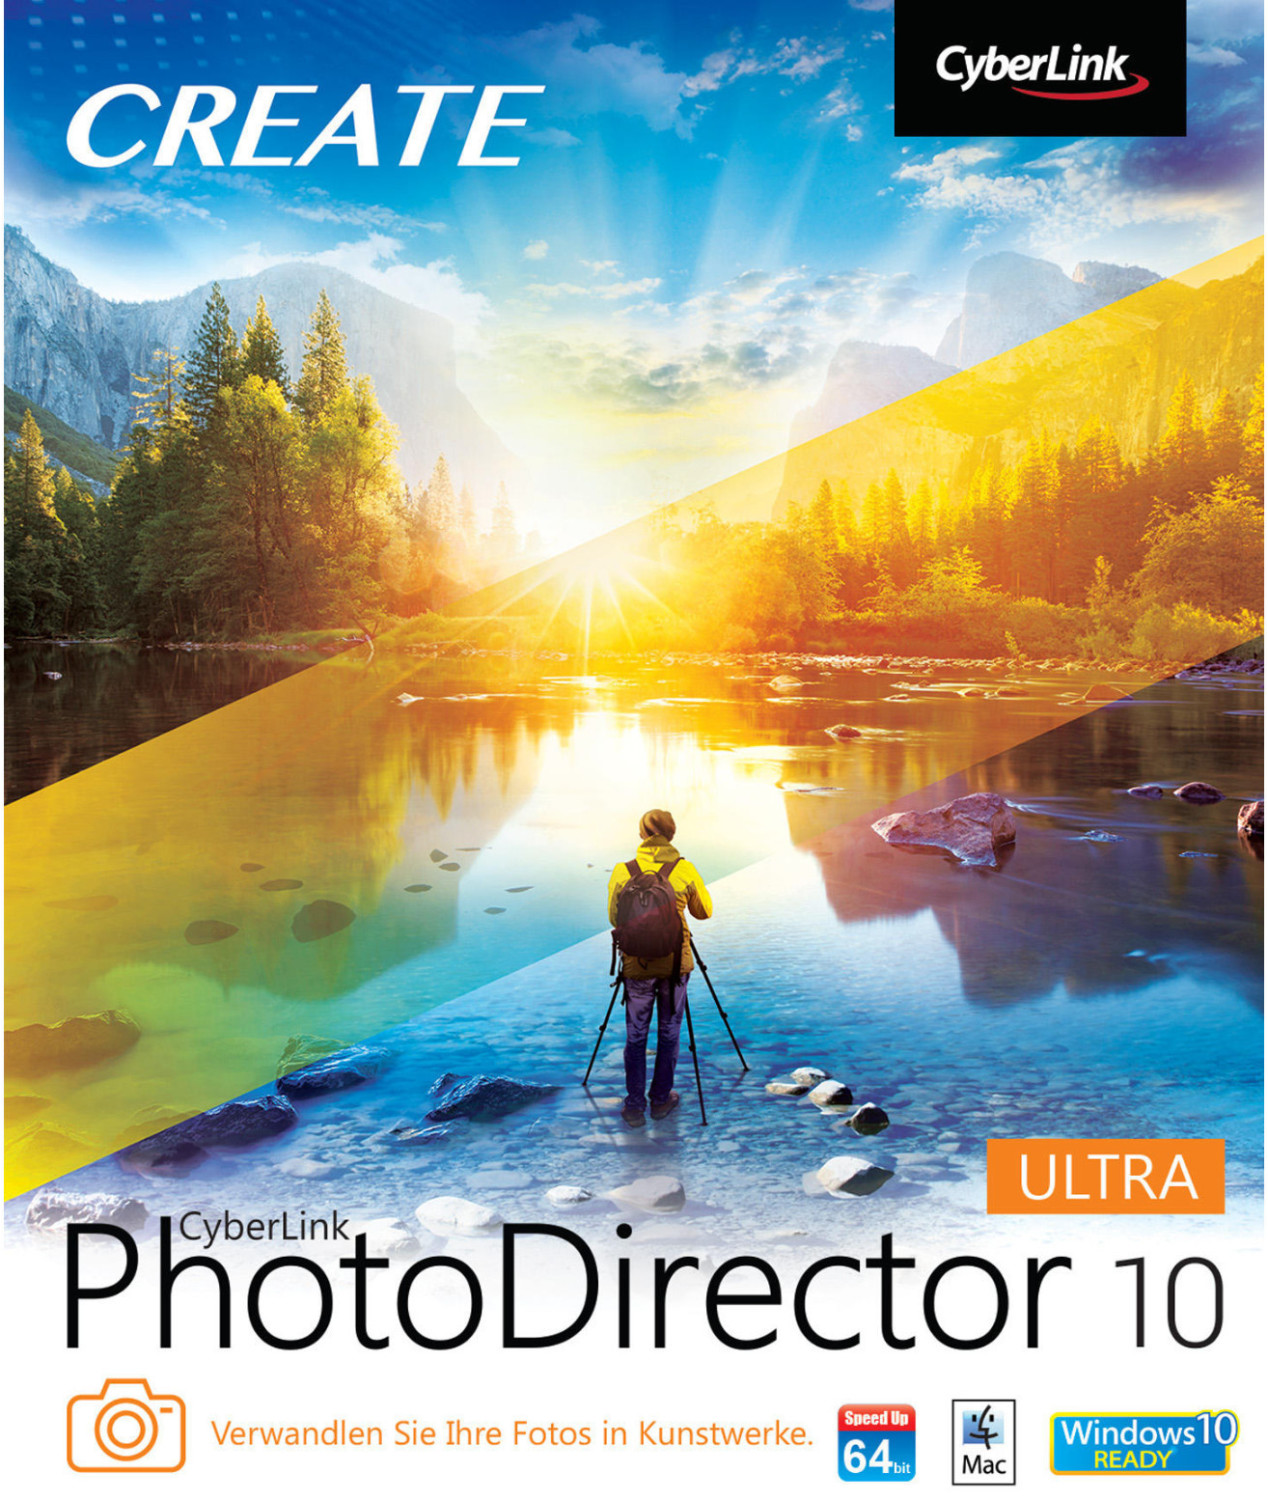 cyberlink photodirector 9 free download